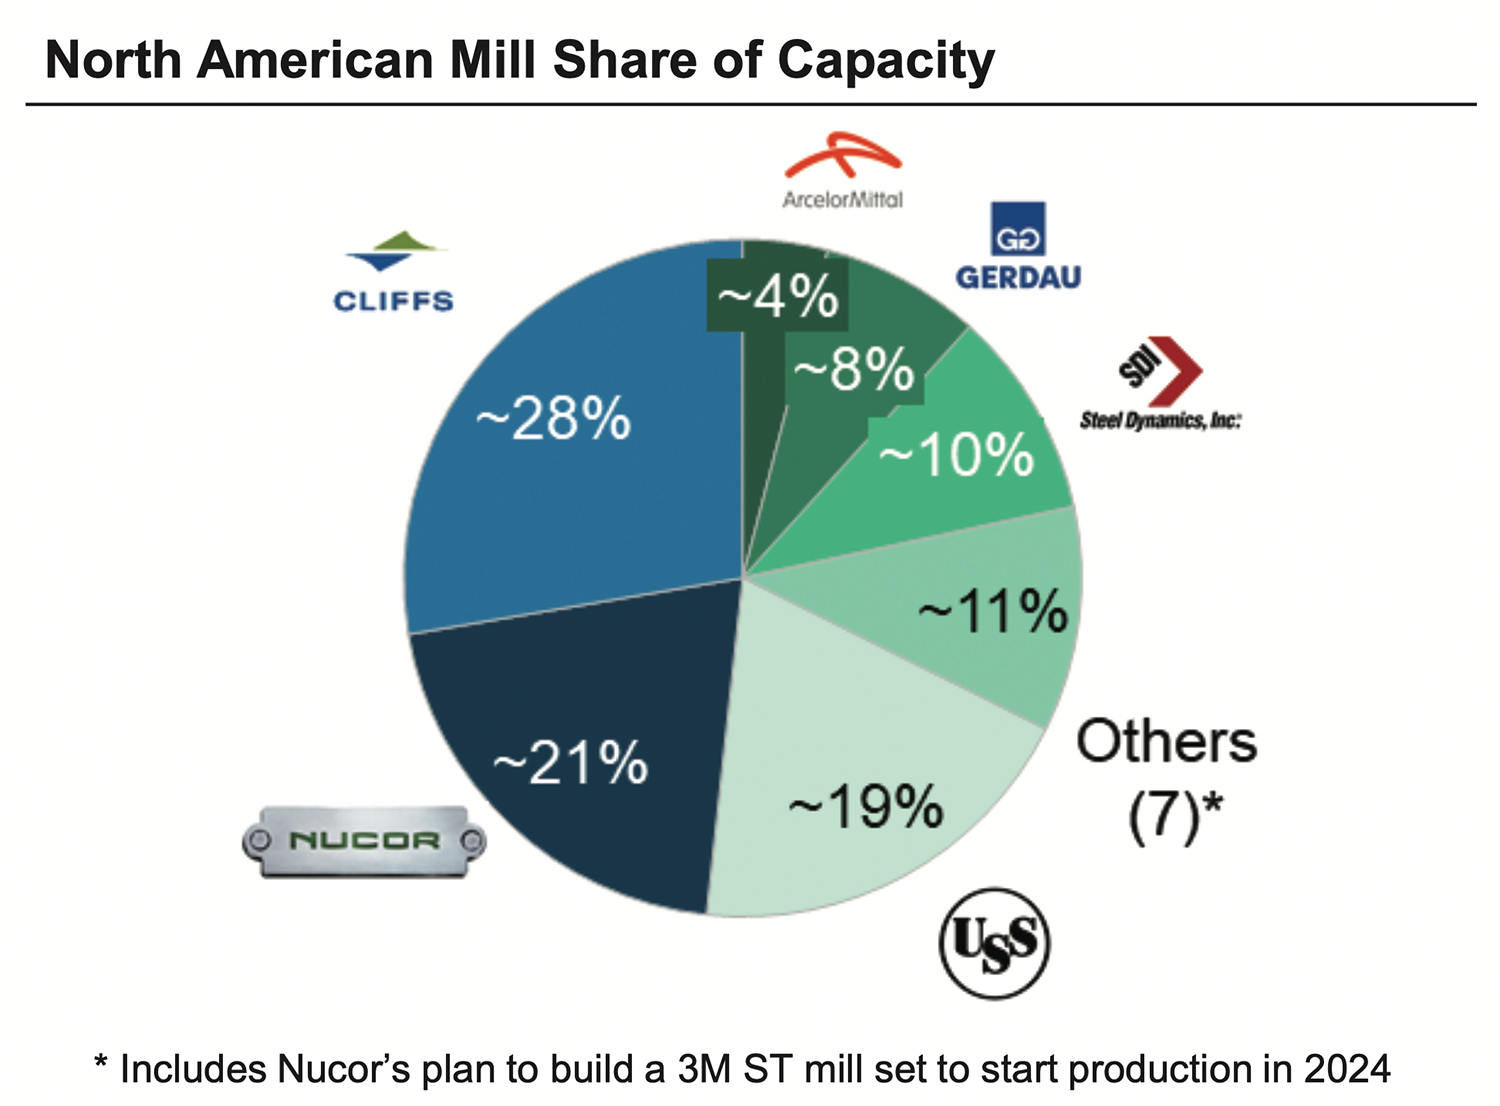 North American Mill Share of Capacity pie chart